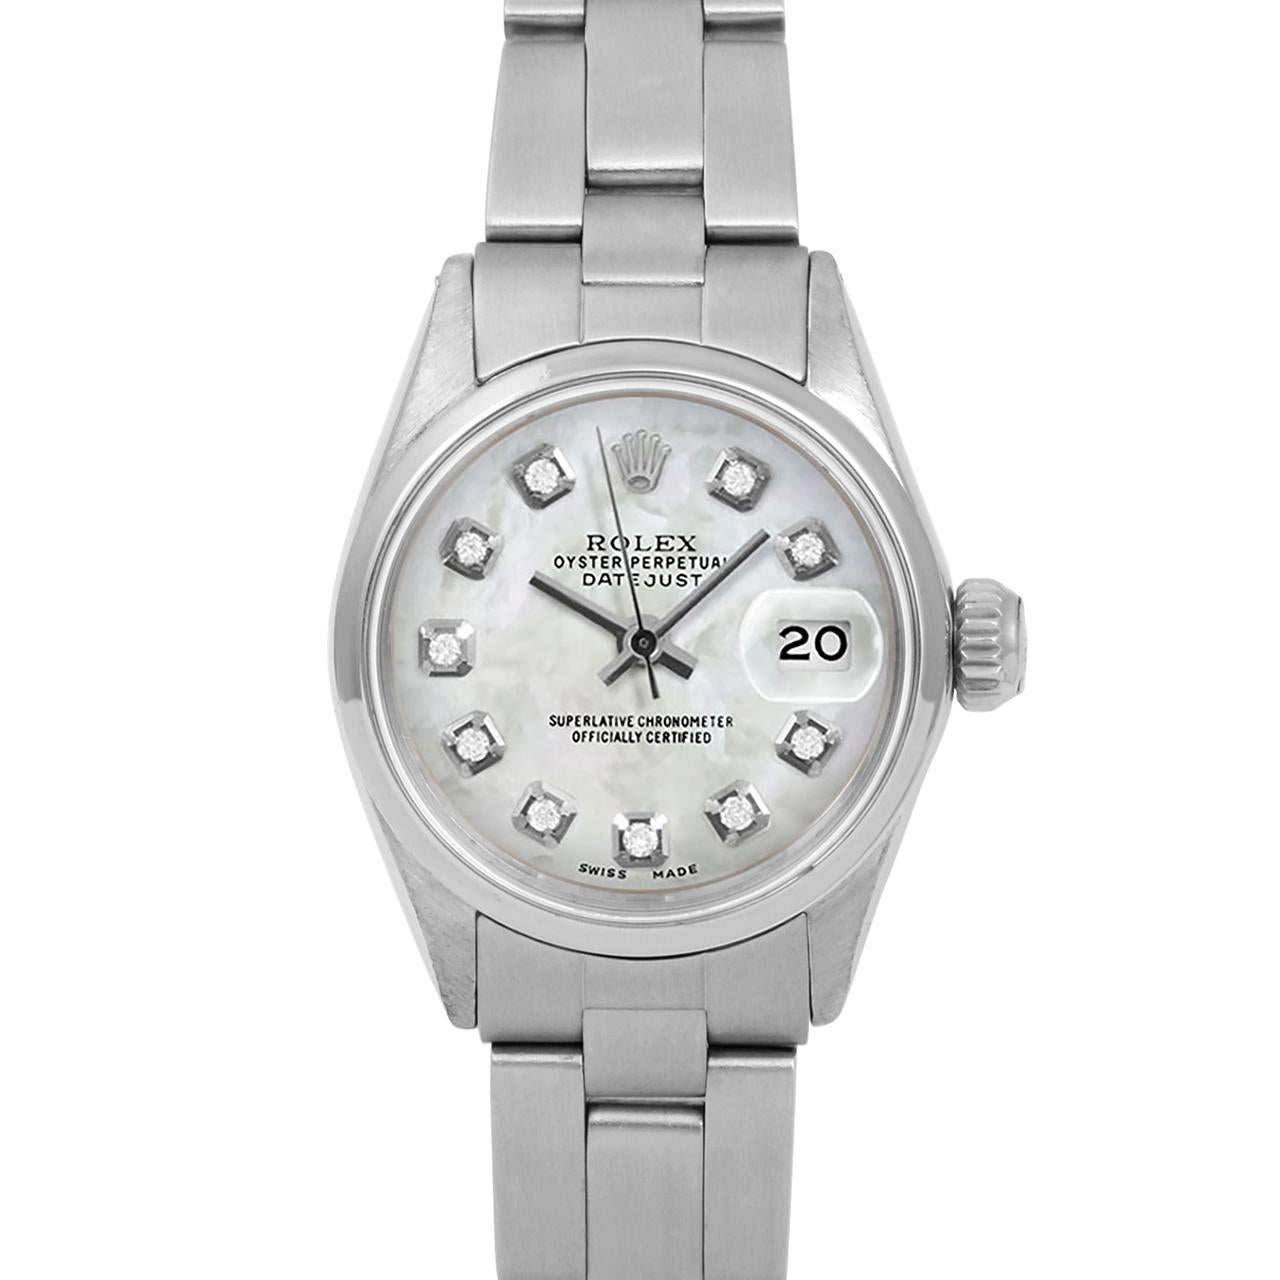 Brand : Rolex
Model : Datejust (Non-Quickset Model)
Gender : Ladies
Metals : Stainless Steel
Case Size : 24 mm
Dial : Custom Mother Of Pearl Diamond Dial (This dial is not original Rolex And has been added aftermarket yet is a beautiful Custom